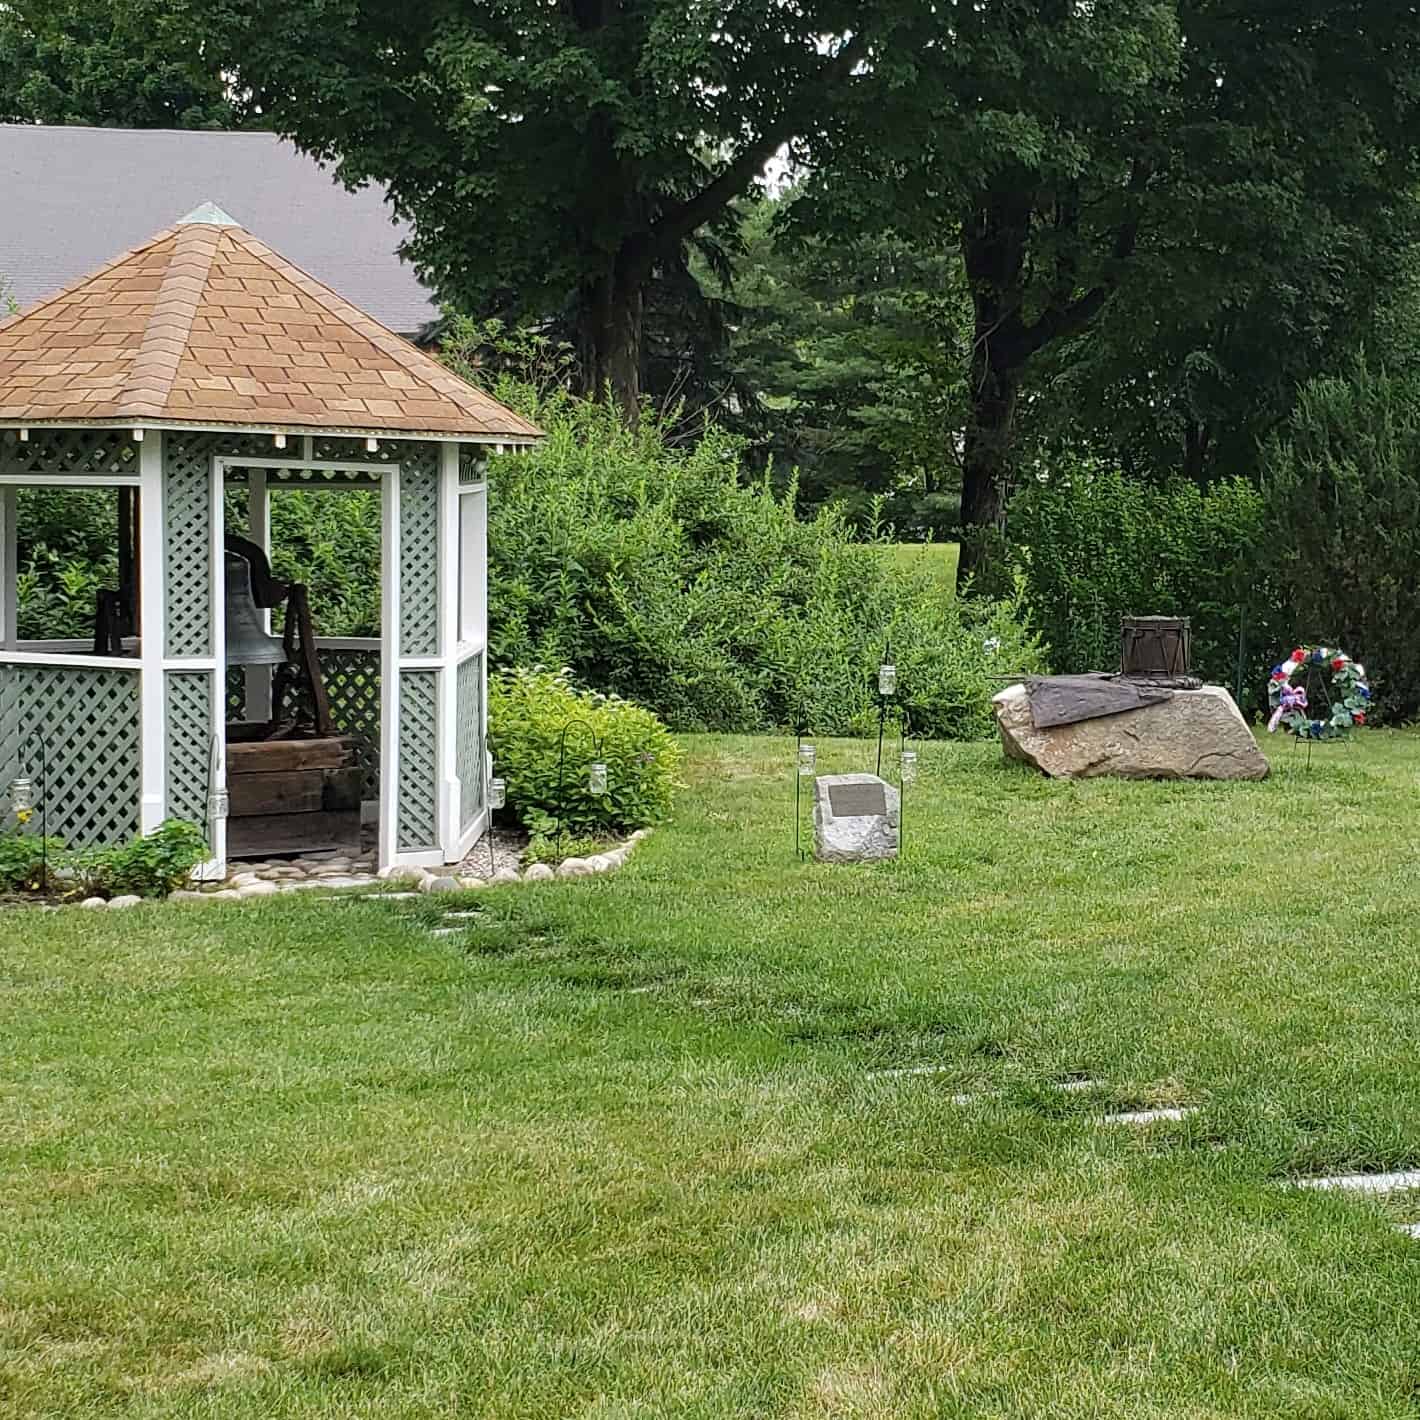 Visit the Westford Museum and Abbot Bell Gazebo Garden